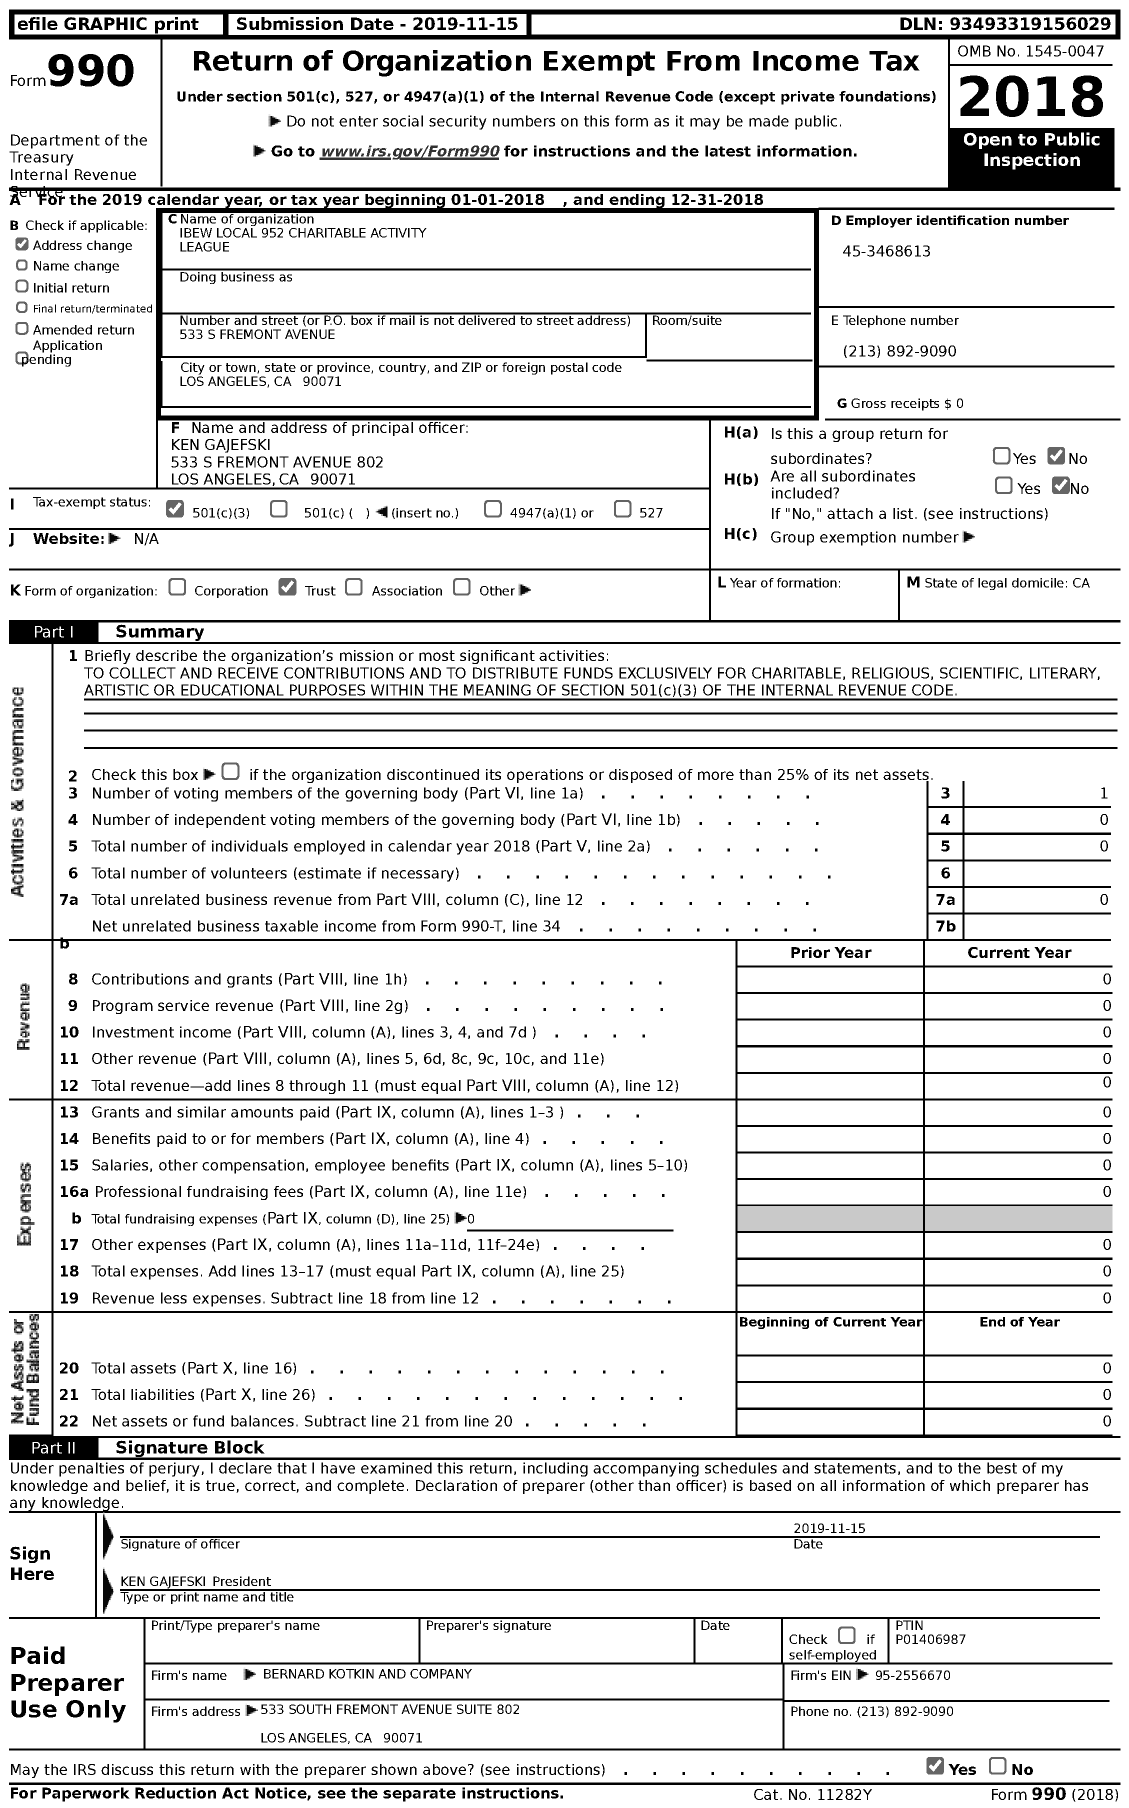 Image of first page of 2018 Form 990 for IBEW Local No 952 Charitable Activity League